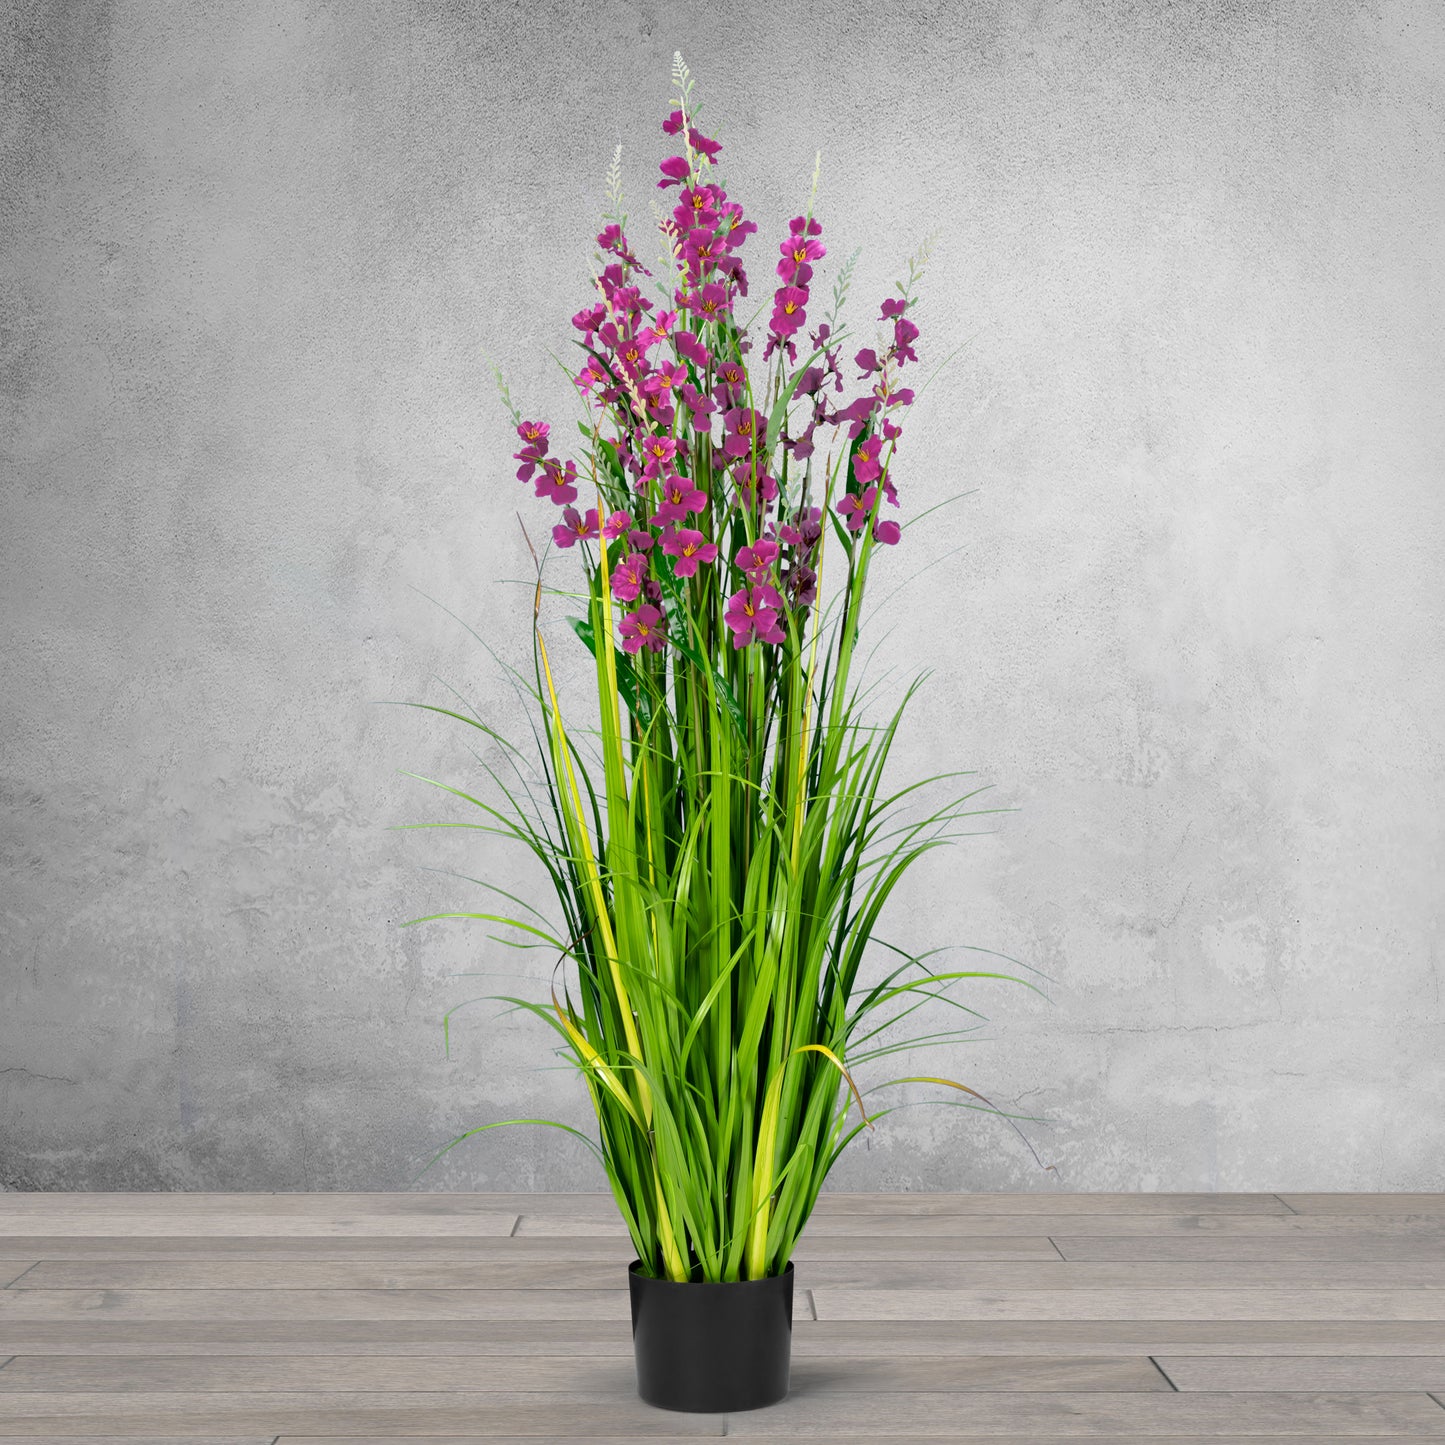 5 Feet High Artificial Reed with Decorative Dark Mauve Flowers